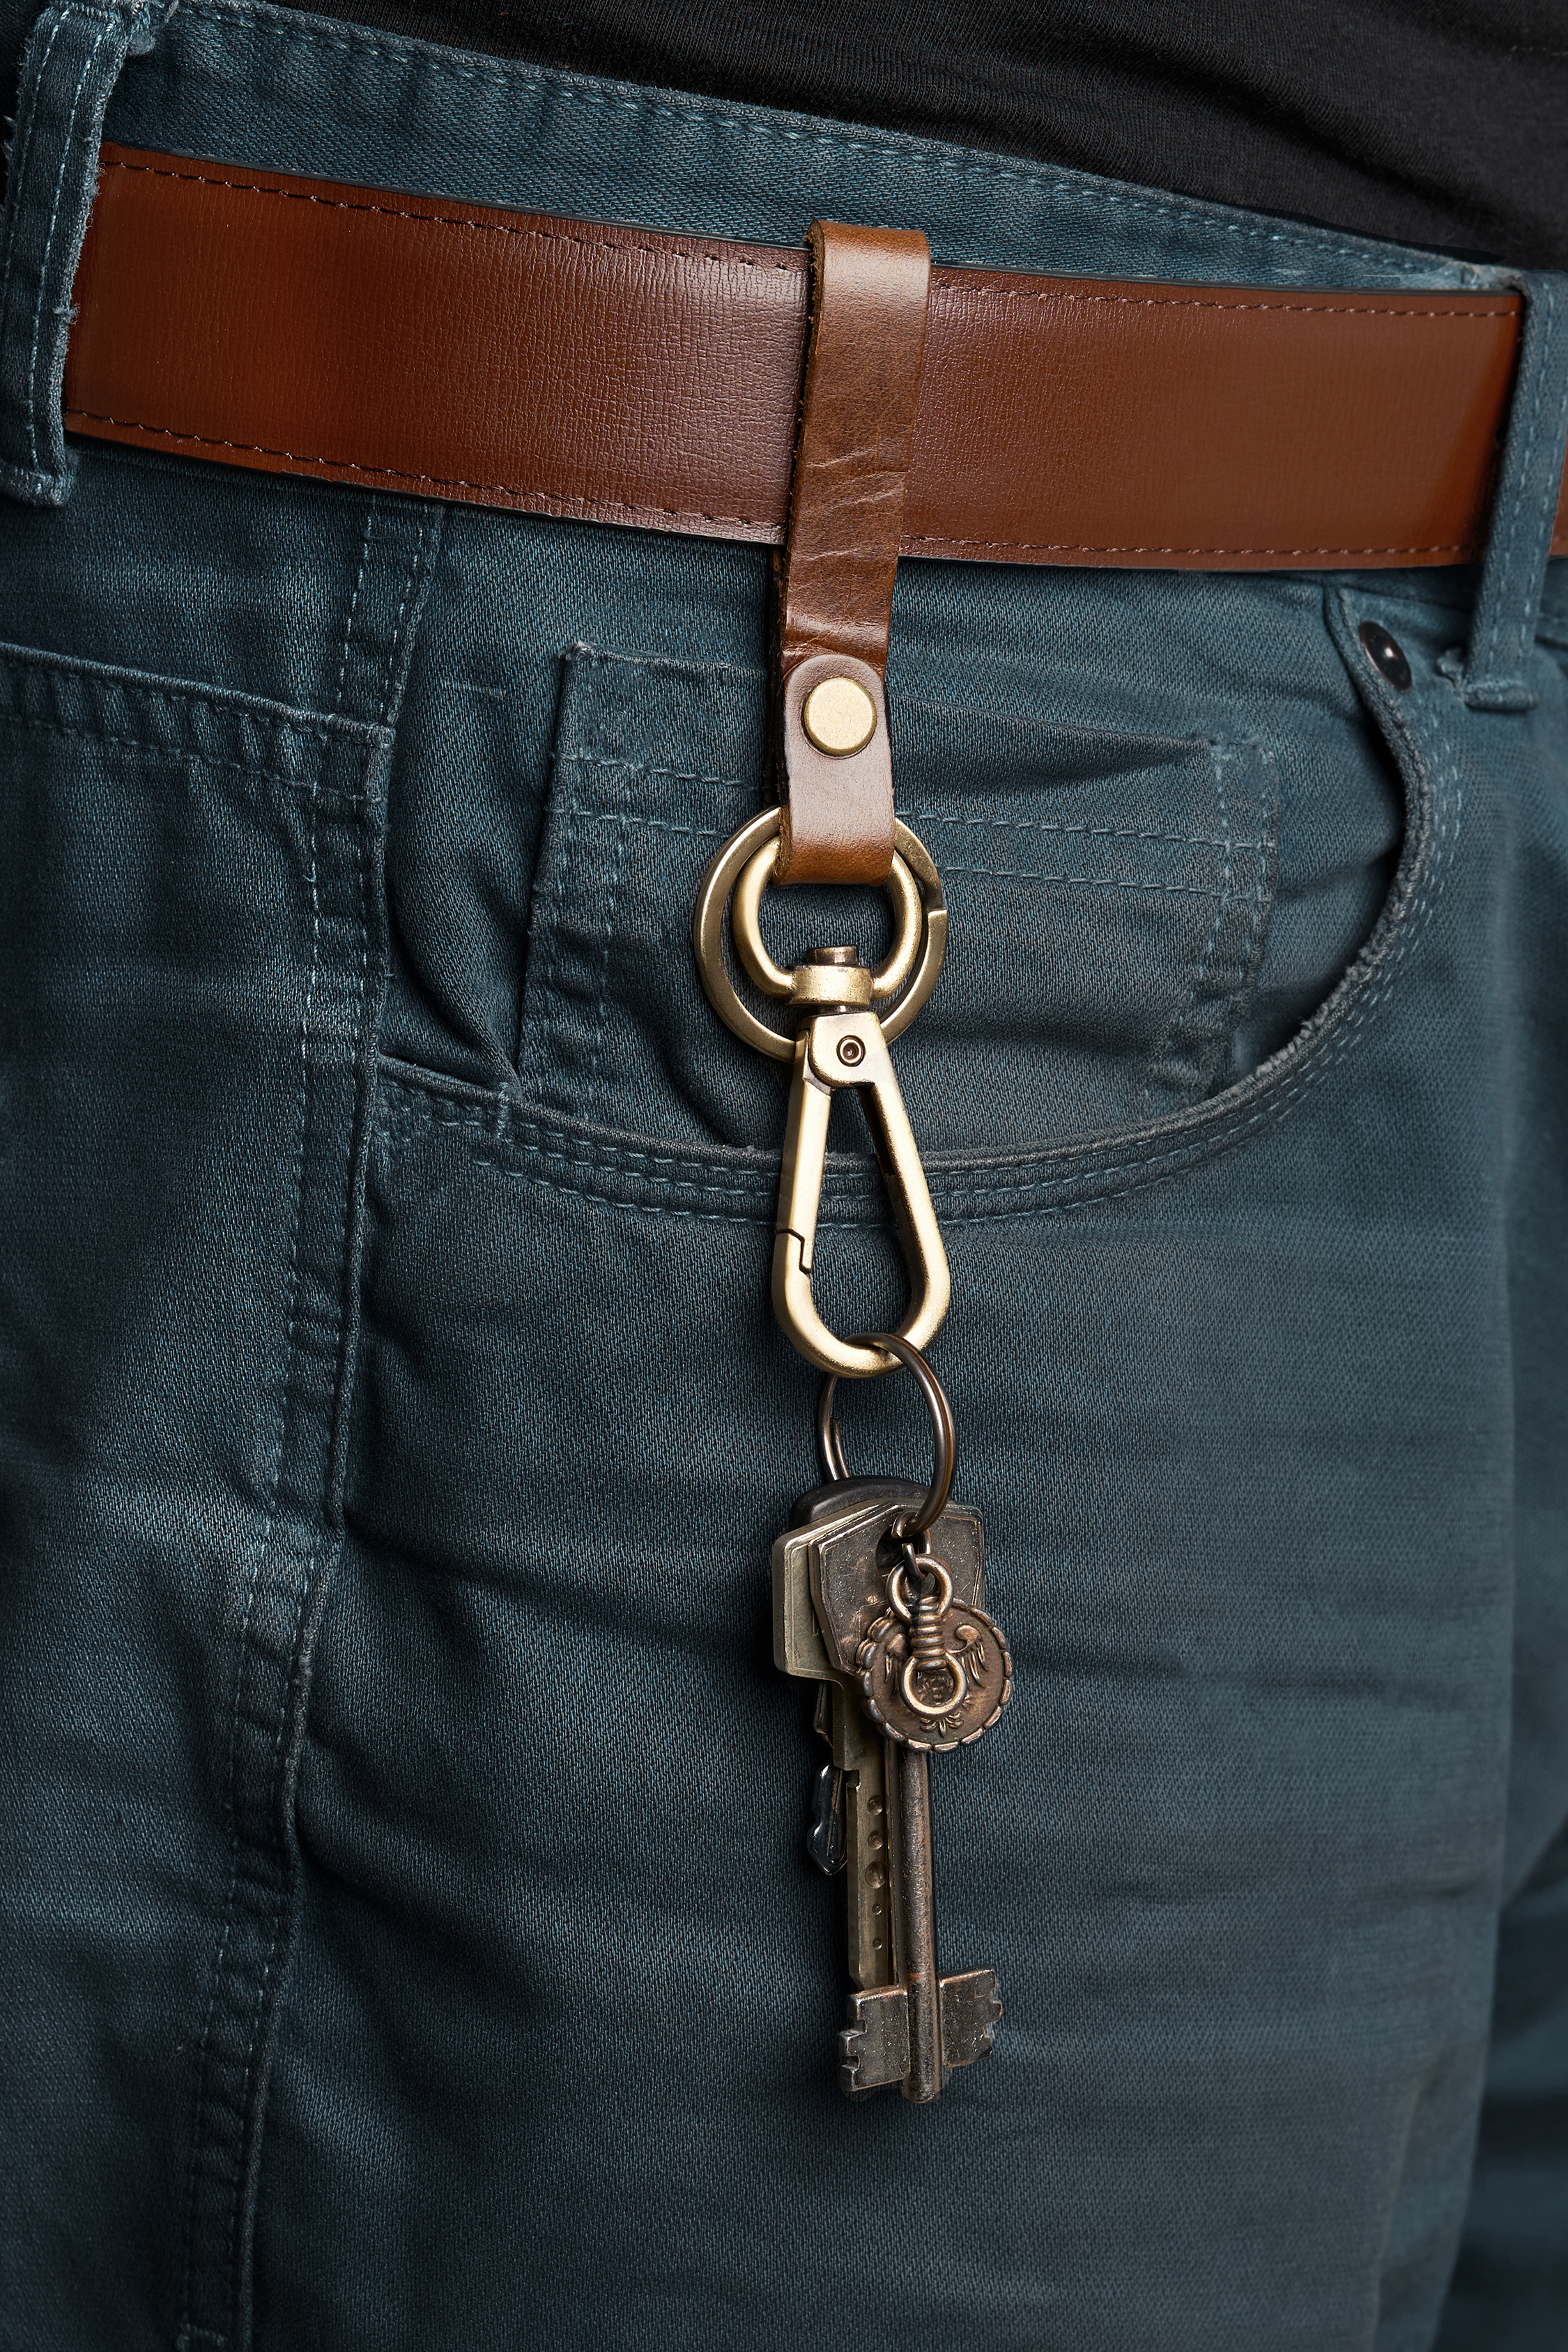 Stylish keychain with brown leather belt | Source: Shutterstock.com